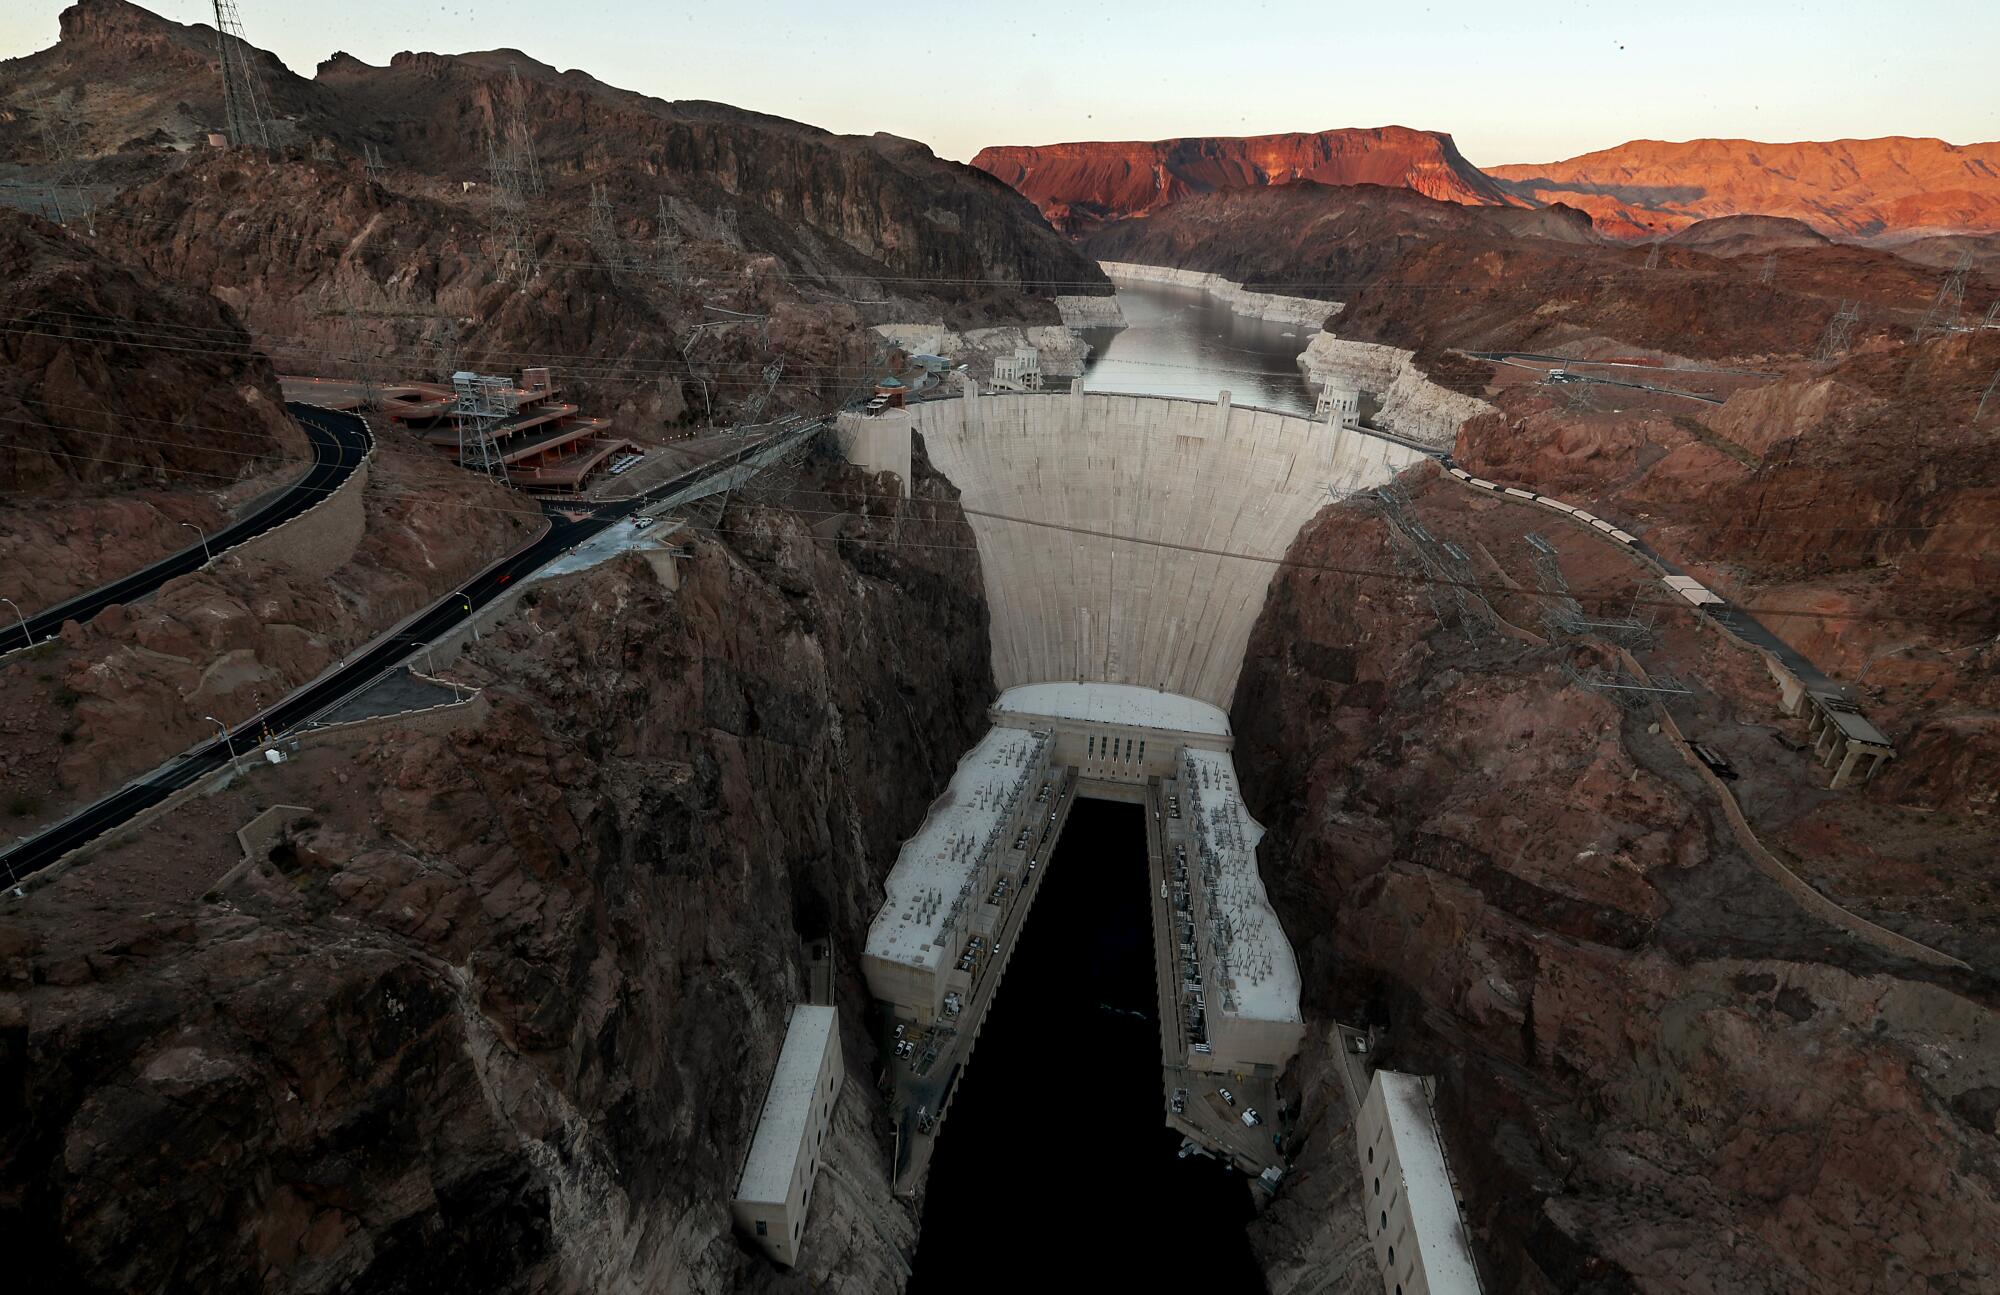 Low water is visible at the Hoover Dam